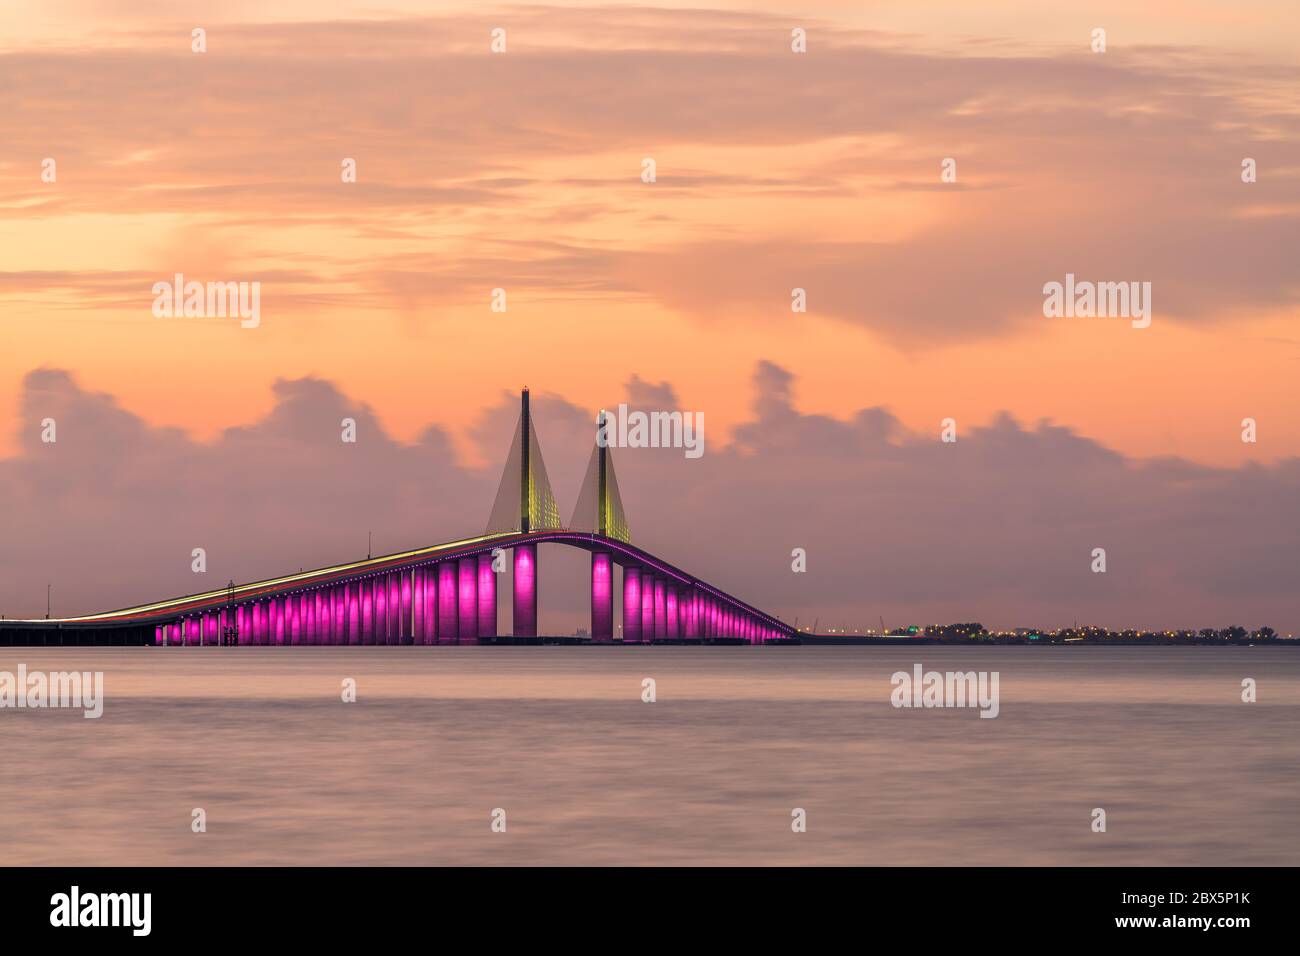 Sunshine Skyway Bridge spanning the Lower Tampa Bay and connecting Terra Ceia to St. Petersburg, Florida, USA. Stock Photo